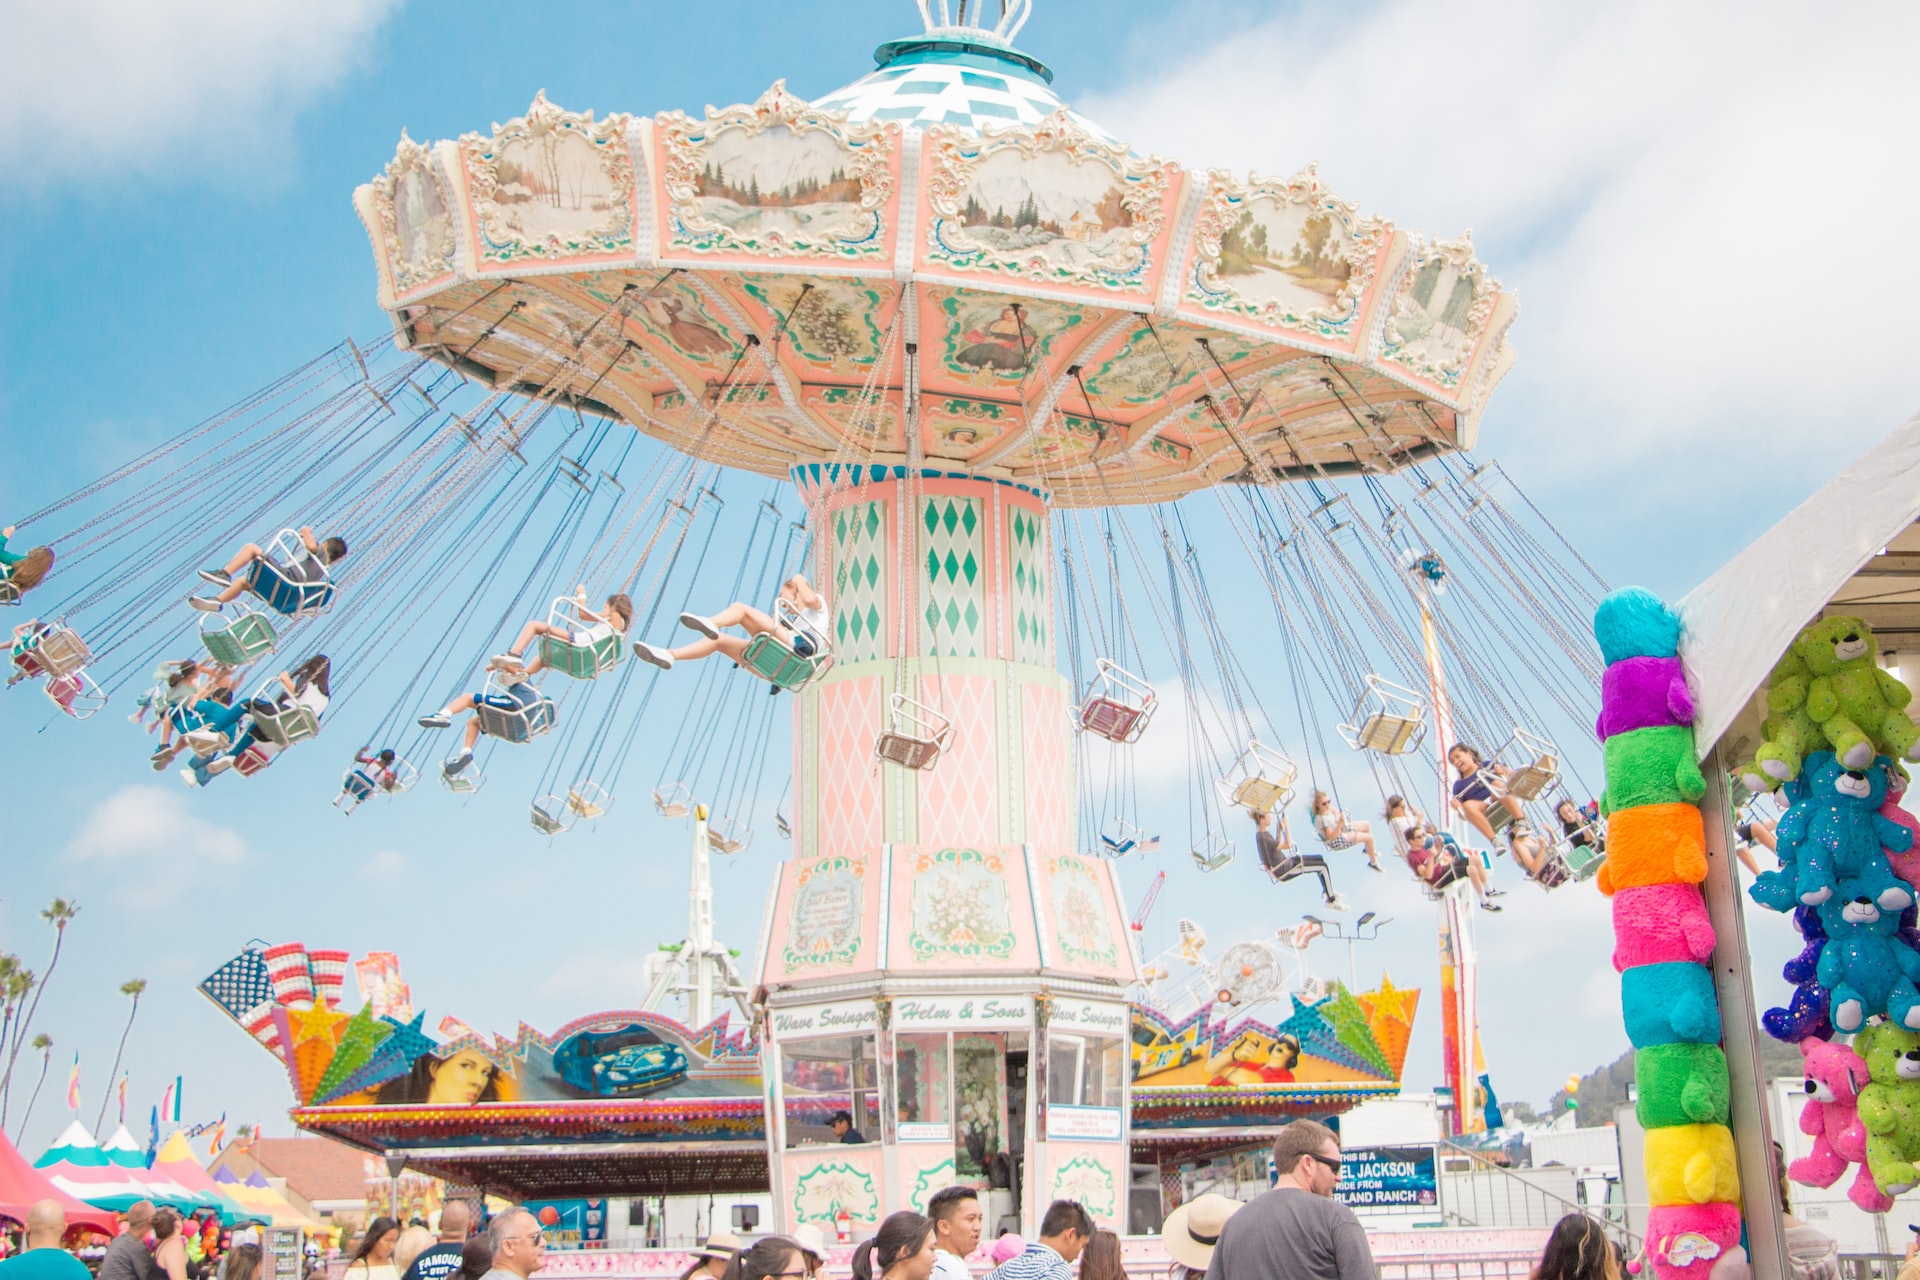 Photo of people riding a merry-go-round